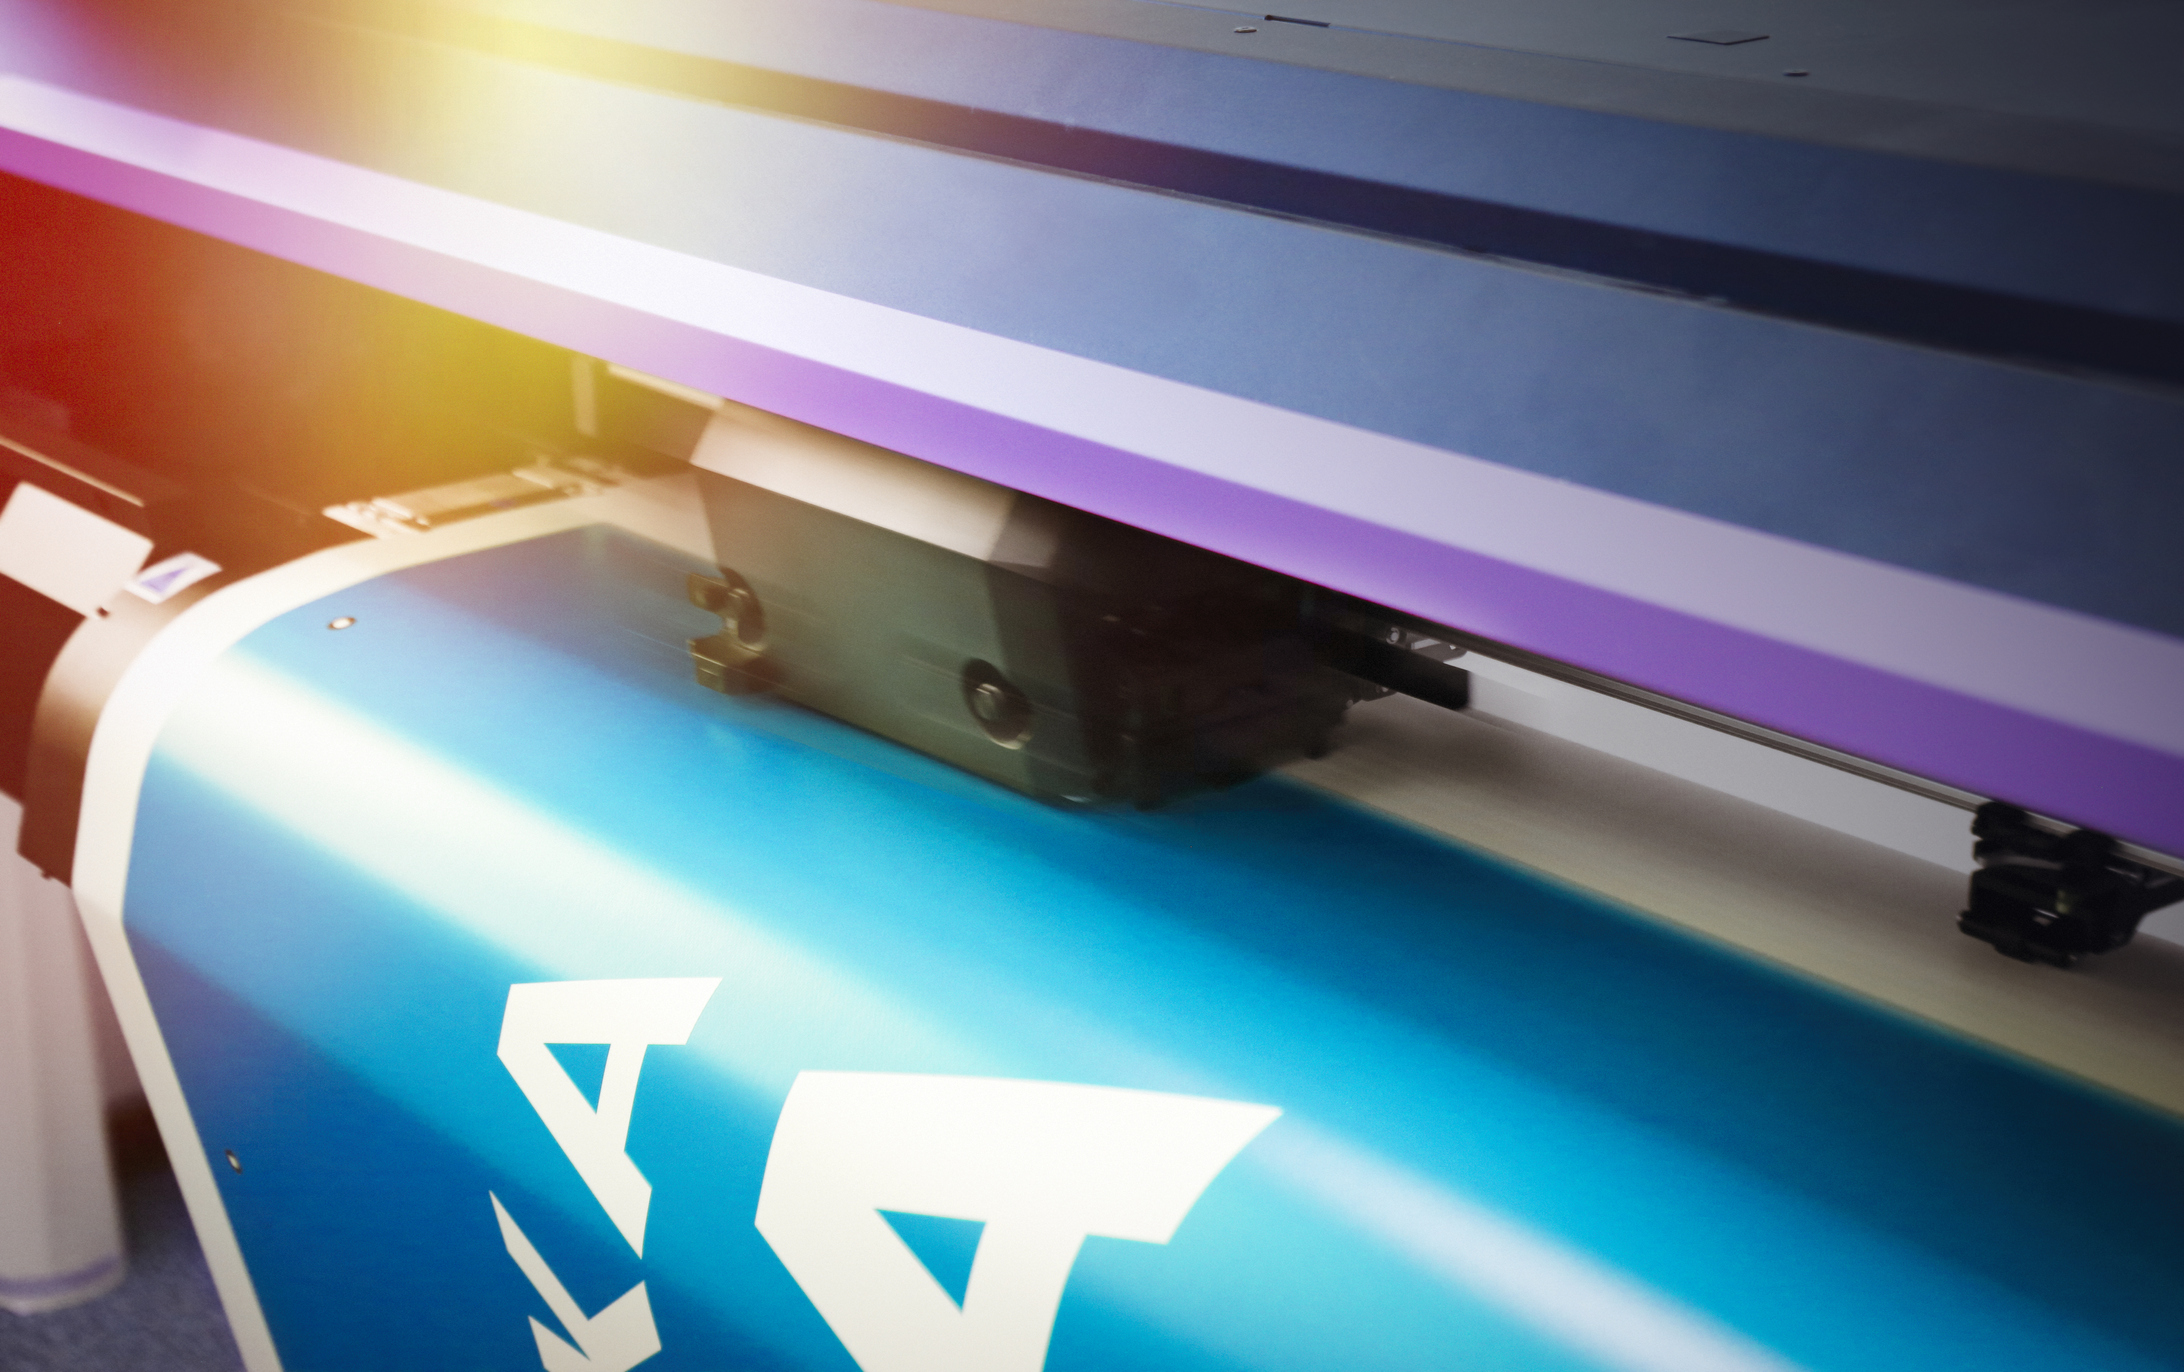 label printing services in Pickering, ON